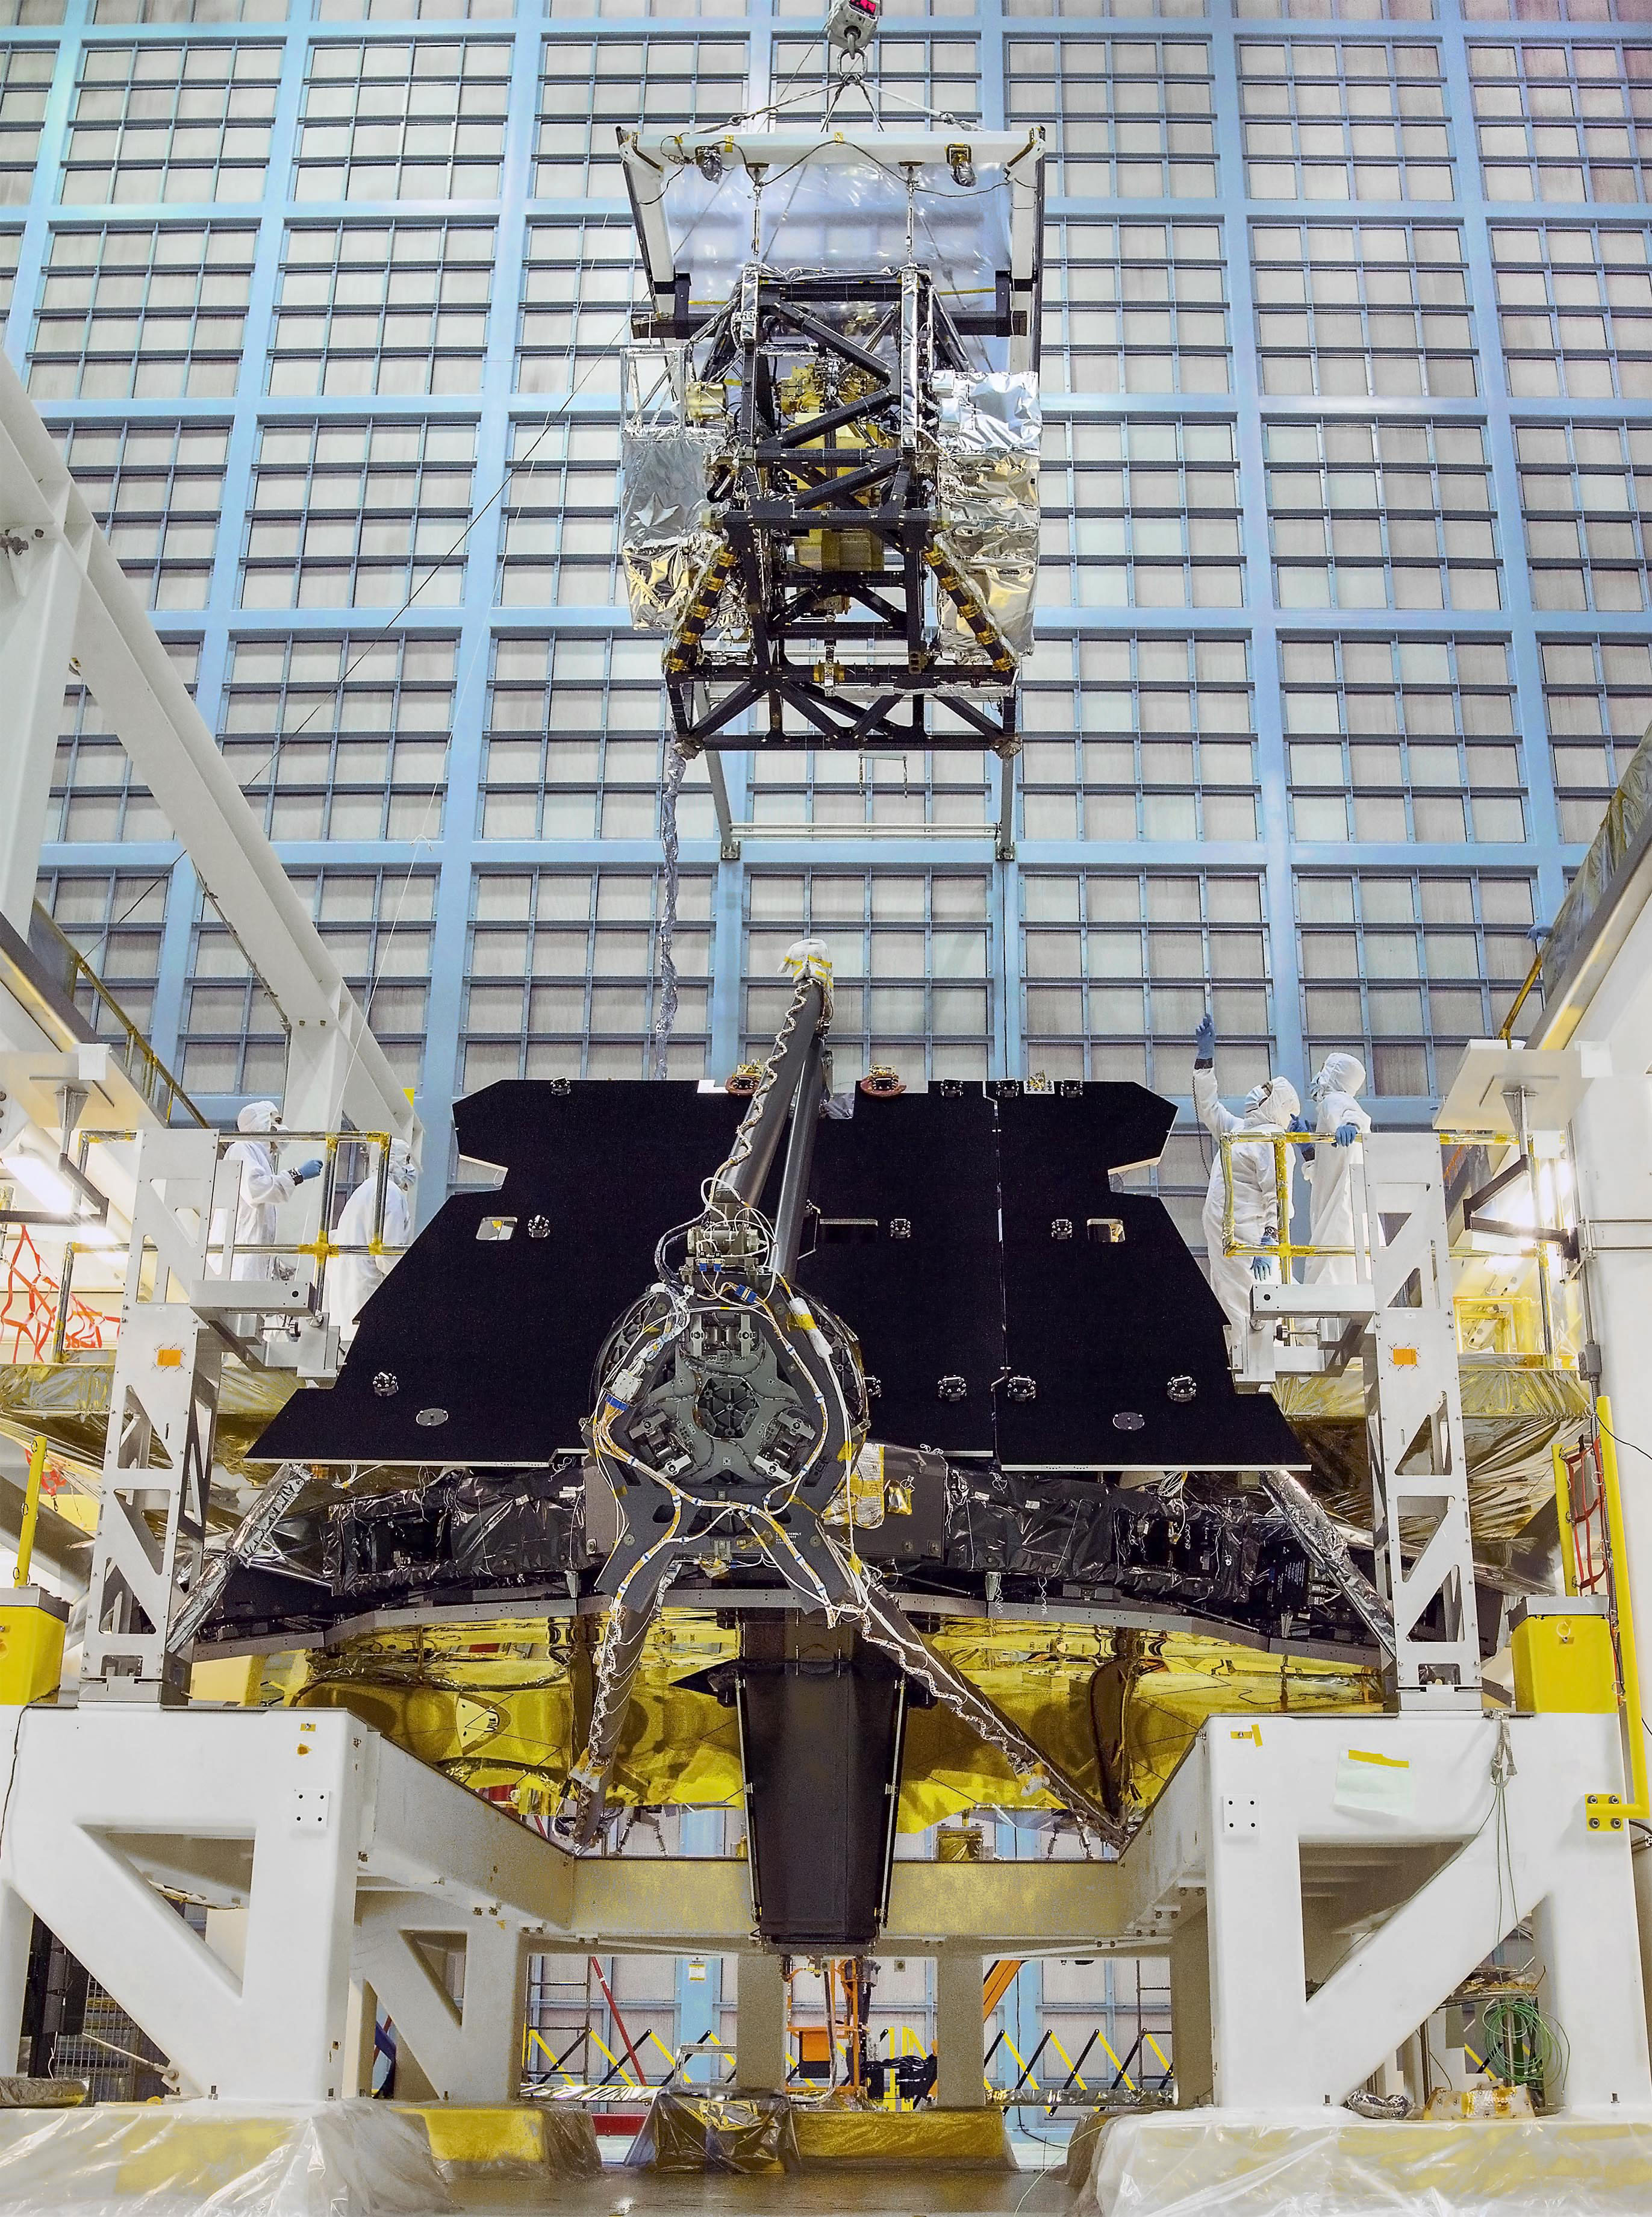 Webb’s instrument module is integrated onto the back of the telescope, right behind the mirrors. The telescope is facedown on a white stand, with the golden mirrors facing down. The secondary mirror support structure is folded over the mirrors, with the round back of the secondary mirrors facing the camera. Behind it is a black radiator panel. The instrument module is being lowered by a crane. The 4 science instruments are visible through the module structure. In the background is a wall of HEPA filters that help keep the NASA Goddard cleanroom clean.